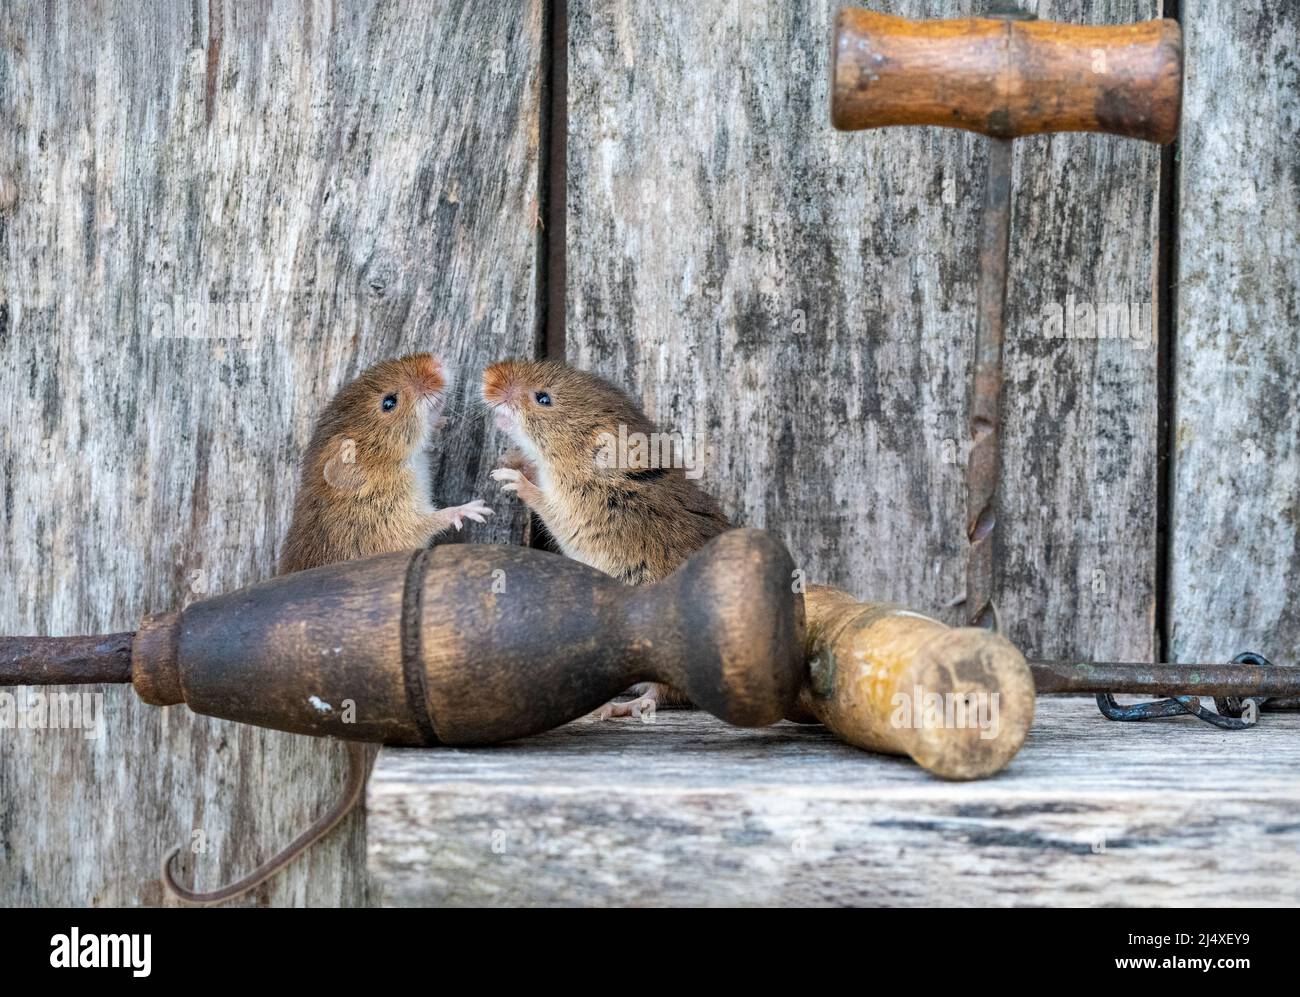 https://c8.alamy.com/comp/2J4XEY9/two-harvest-mice-squabbling-on-a-vintage-tool-inside-a-wooden-tool-shed-2J4XEY9.jpg